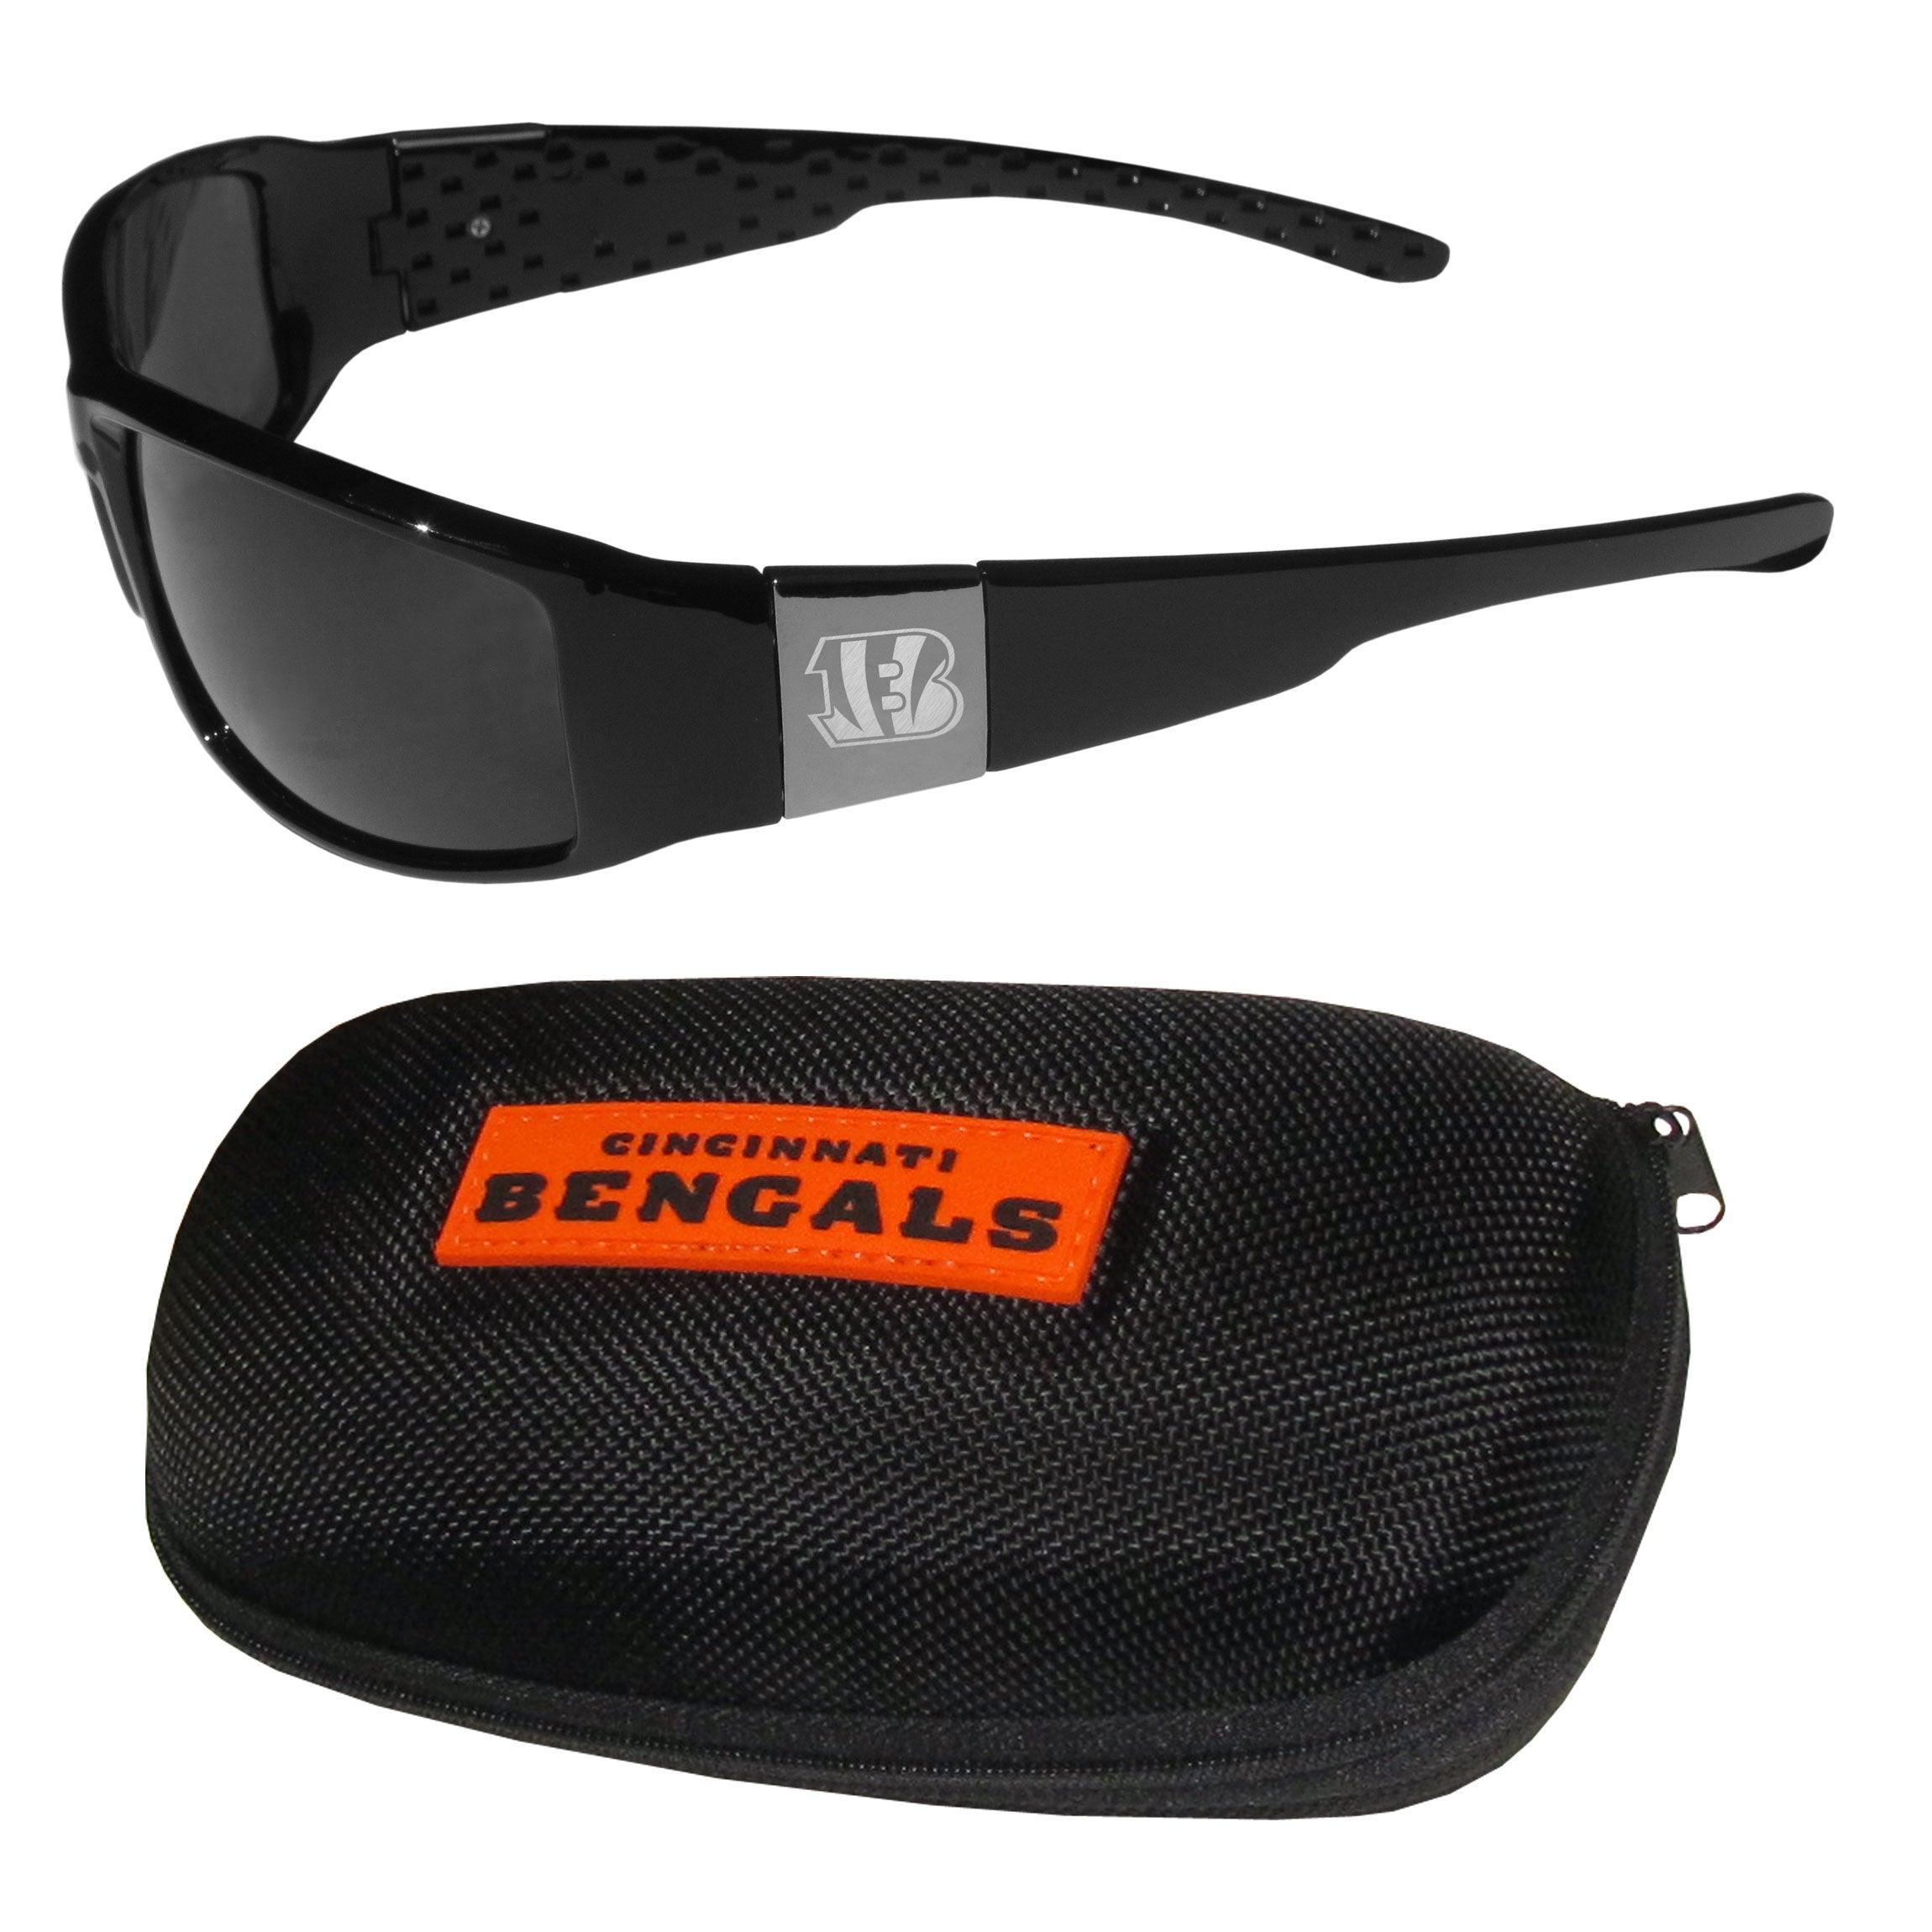 Cincinnati Bengals Chrome Wrap Sunglasses and Zippered Carrying Case - Flyclothing LLC